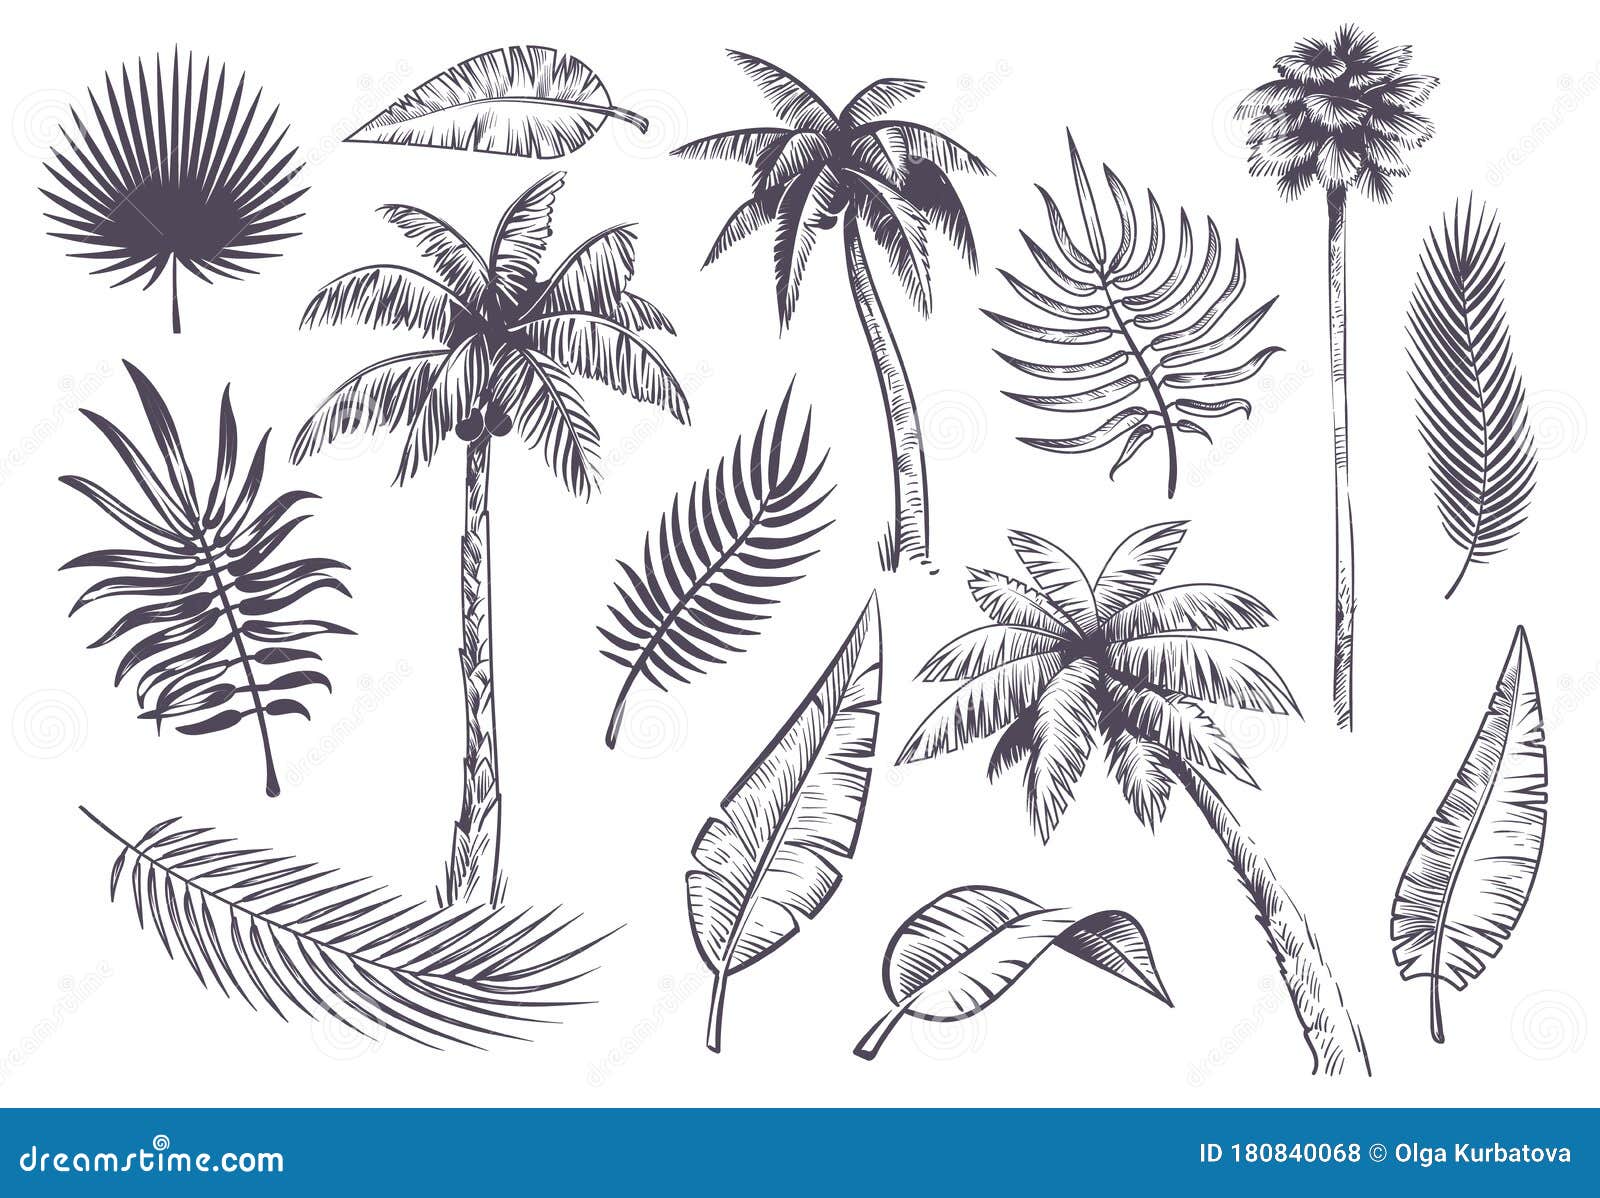 sketch palm trees and leaves. hand drawn tropical palms and leaf, black line silhouette exotic plants hawaii natura